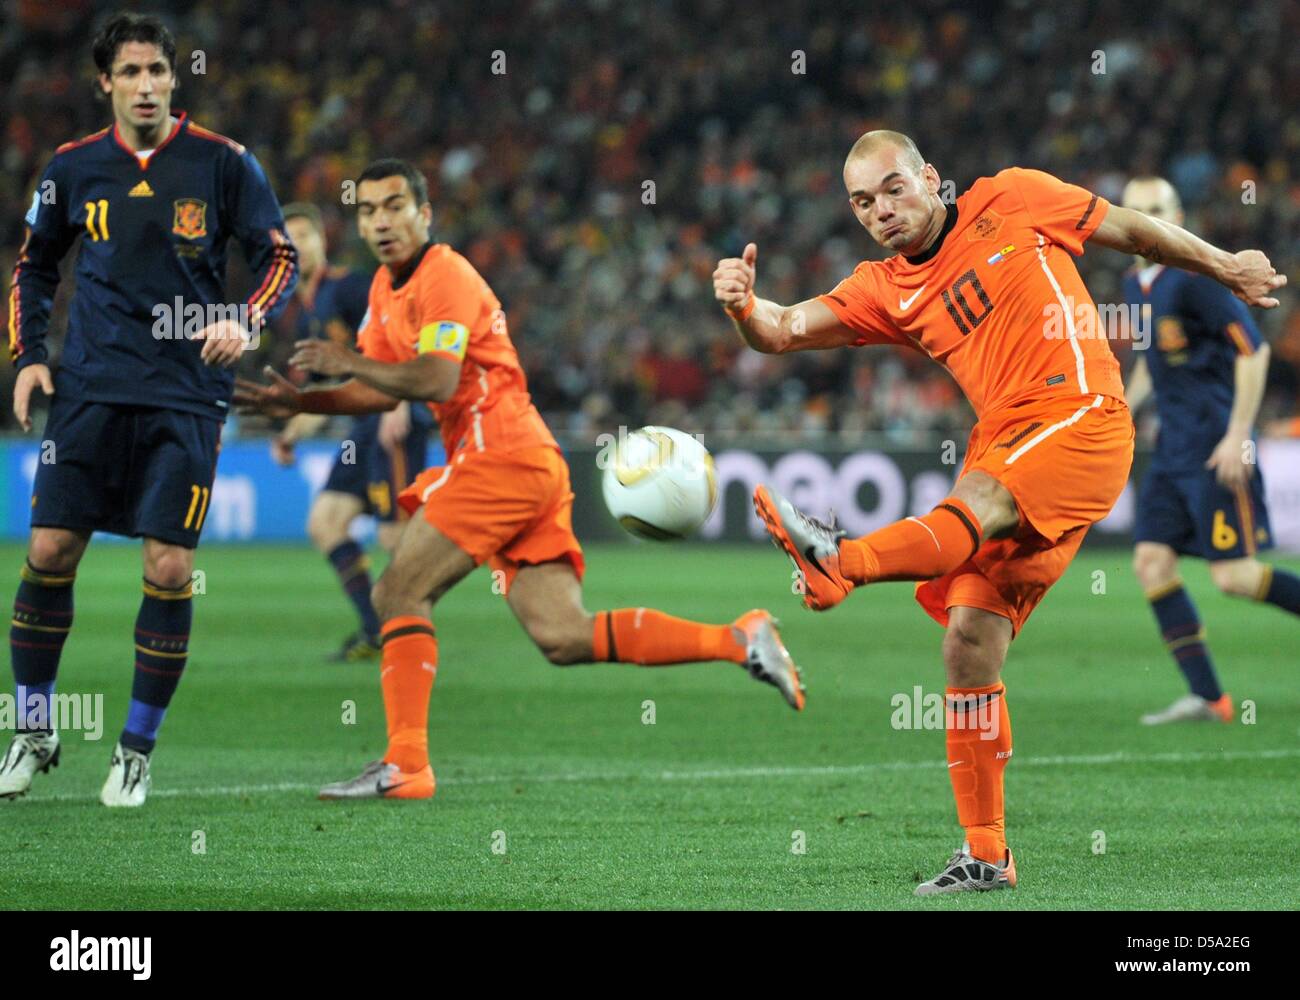 Wesley Sneijder (R) of the Netherlands during the 2010 FIFA World Cup final match between the Netherlands and Spain at the Soccer City Stadium in Johannesburg, South Africa 11 July 2010. Photo: Bernd Weissbrod dpa - Please refer to http://dpaq.de/FIFA-WM2010-TC Stock Photo